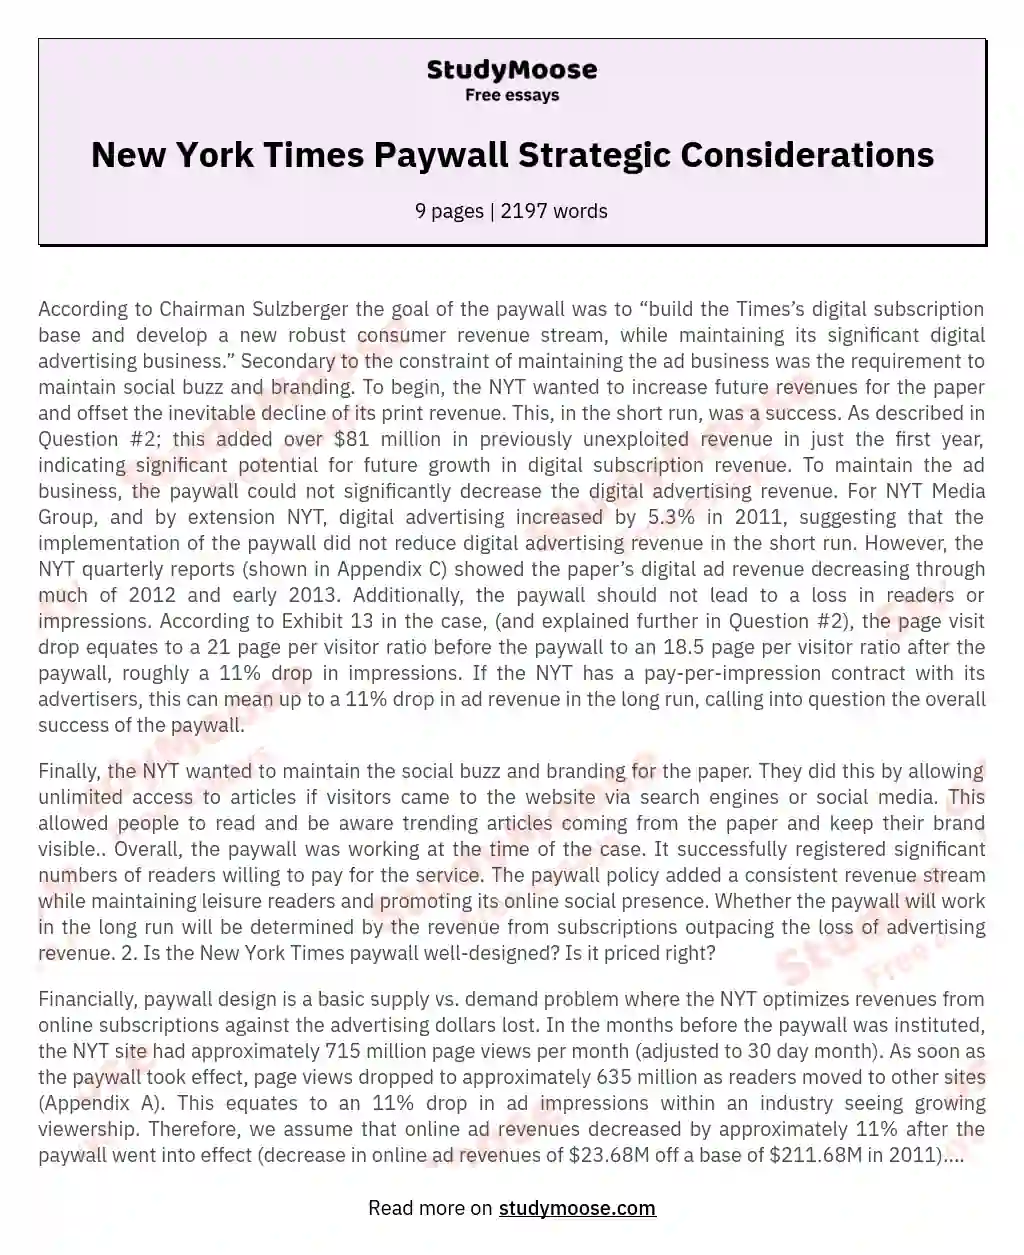 New York Times Paywall Strategic Considerations